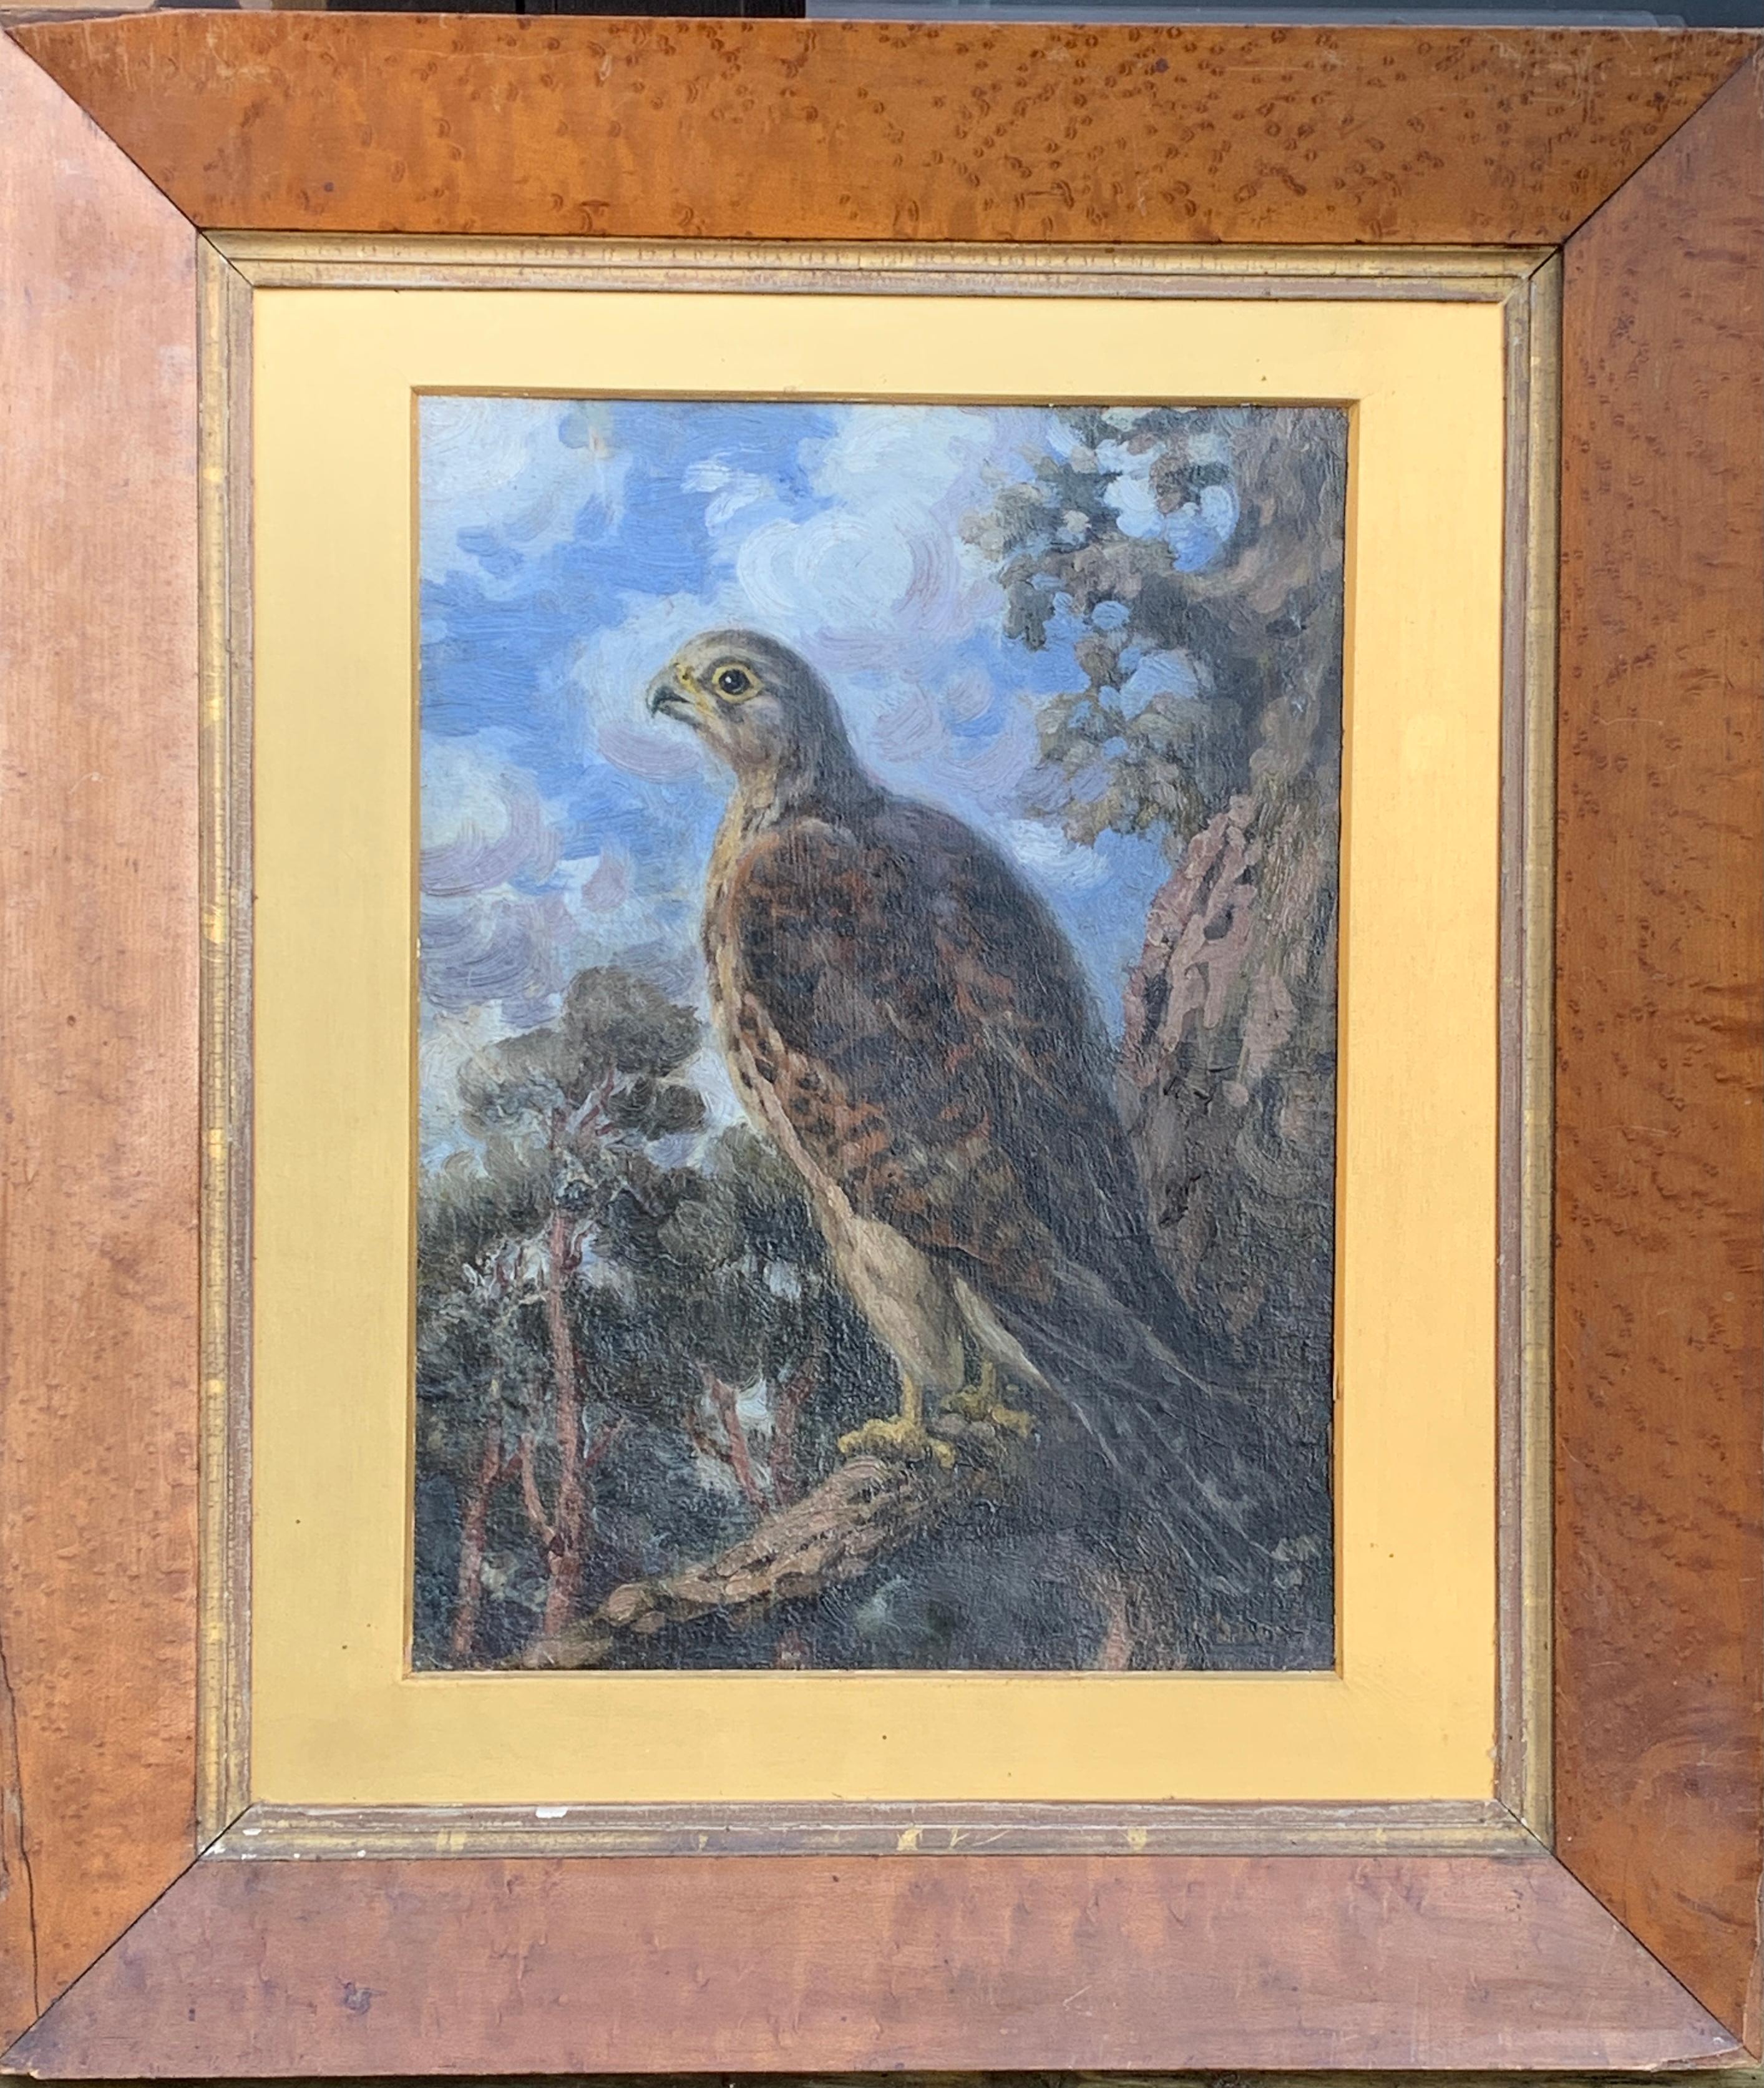 George Anderson Short Animal Painting - Early 20th century English portrait oil of a Falcon hunting bird in a landscape.